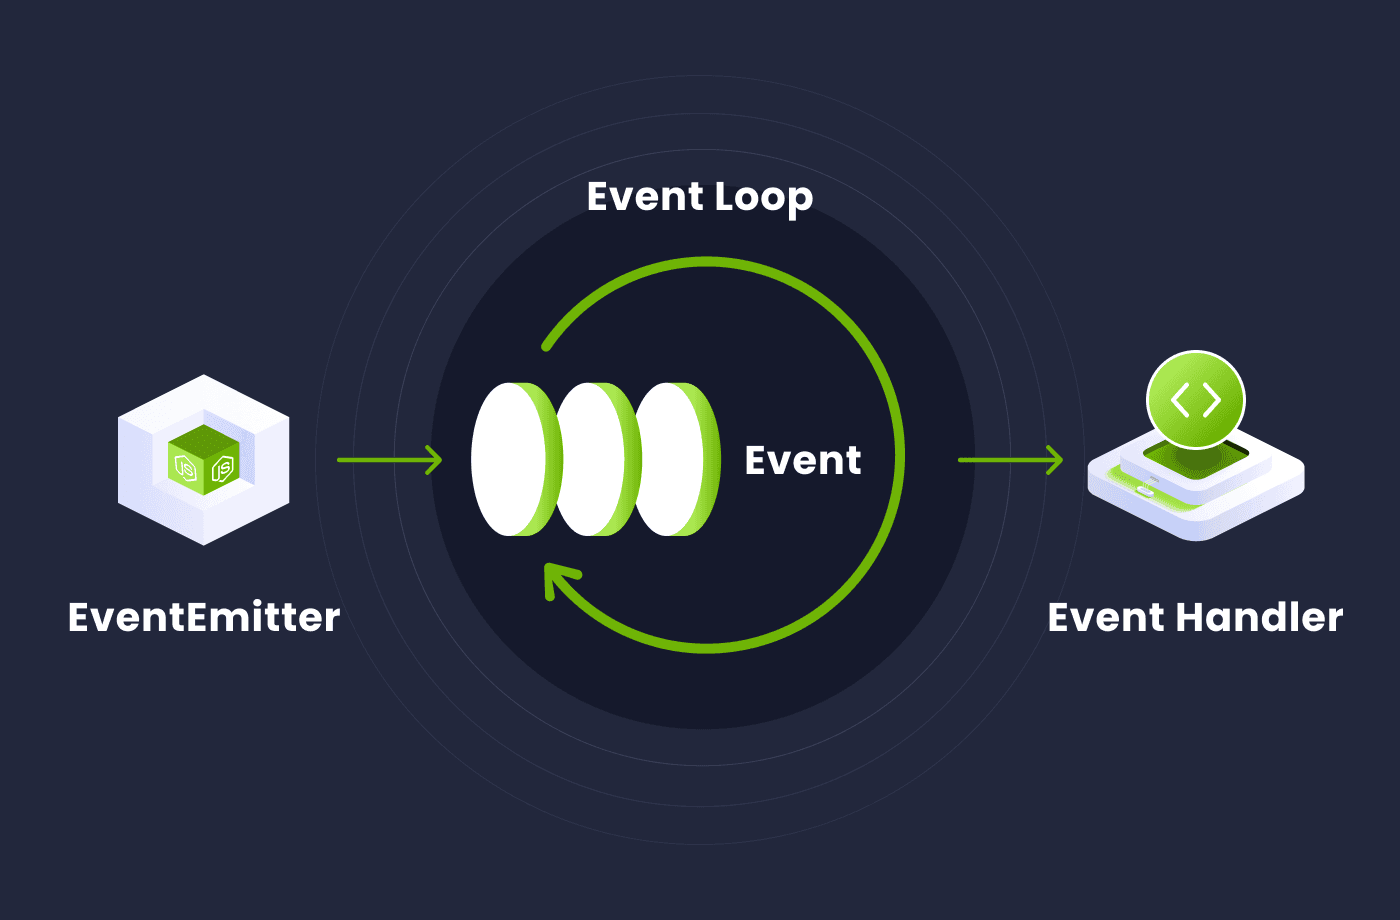 Node.js asynchronous flow control and event loop